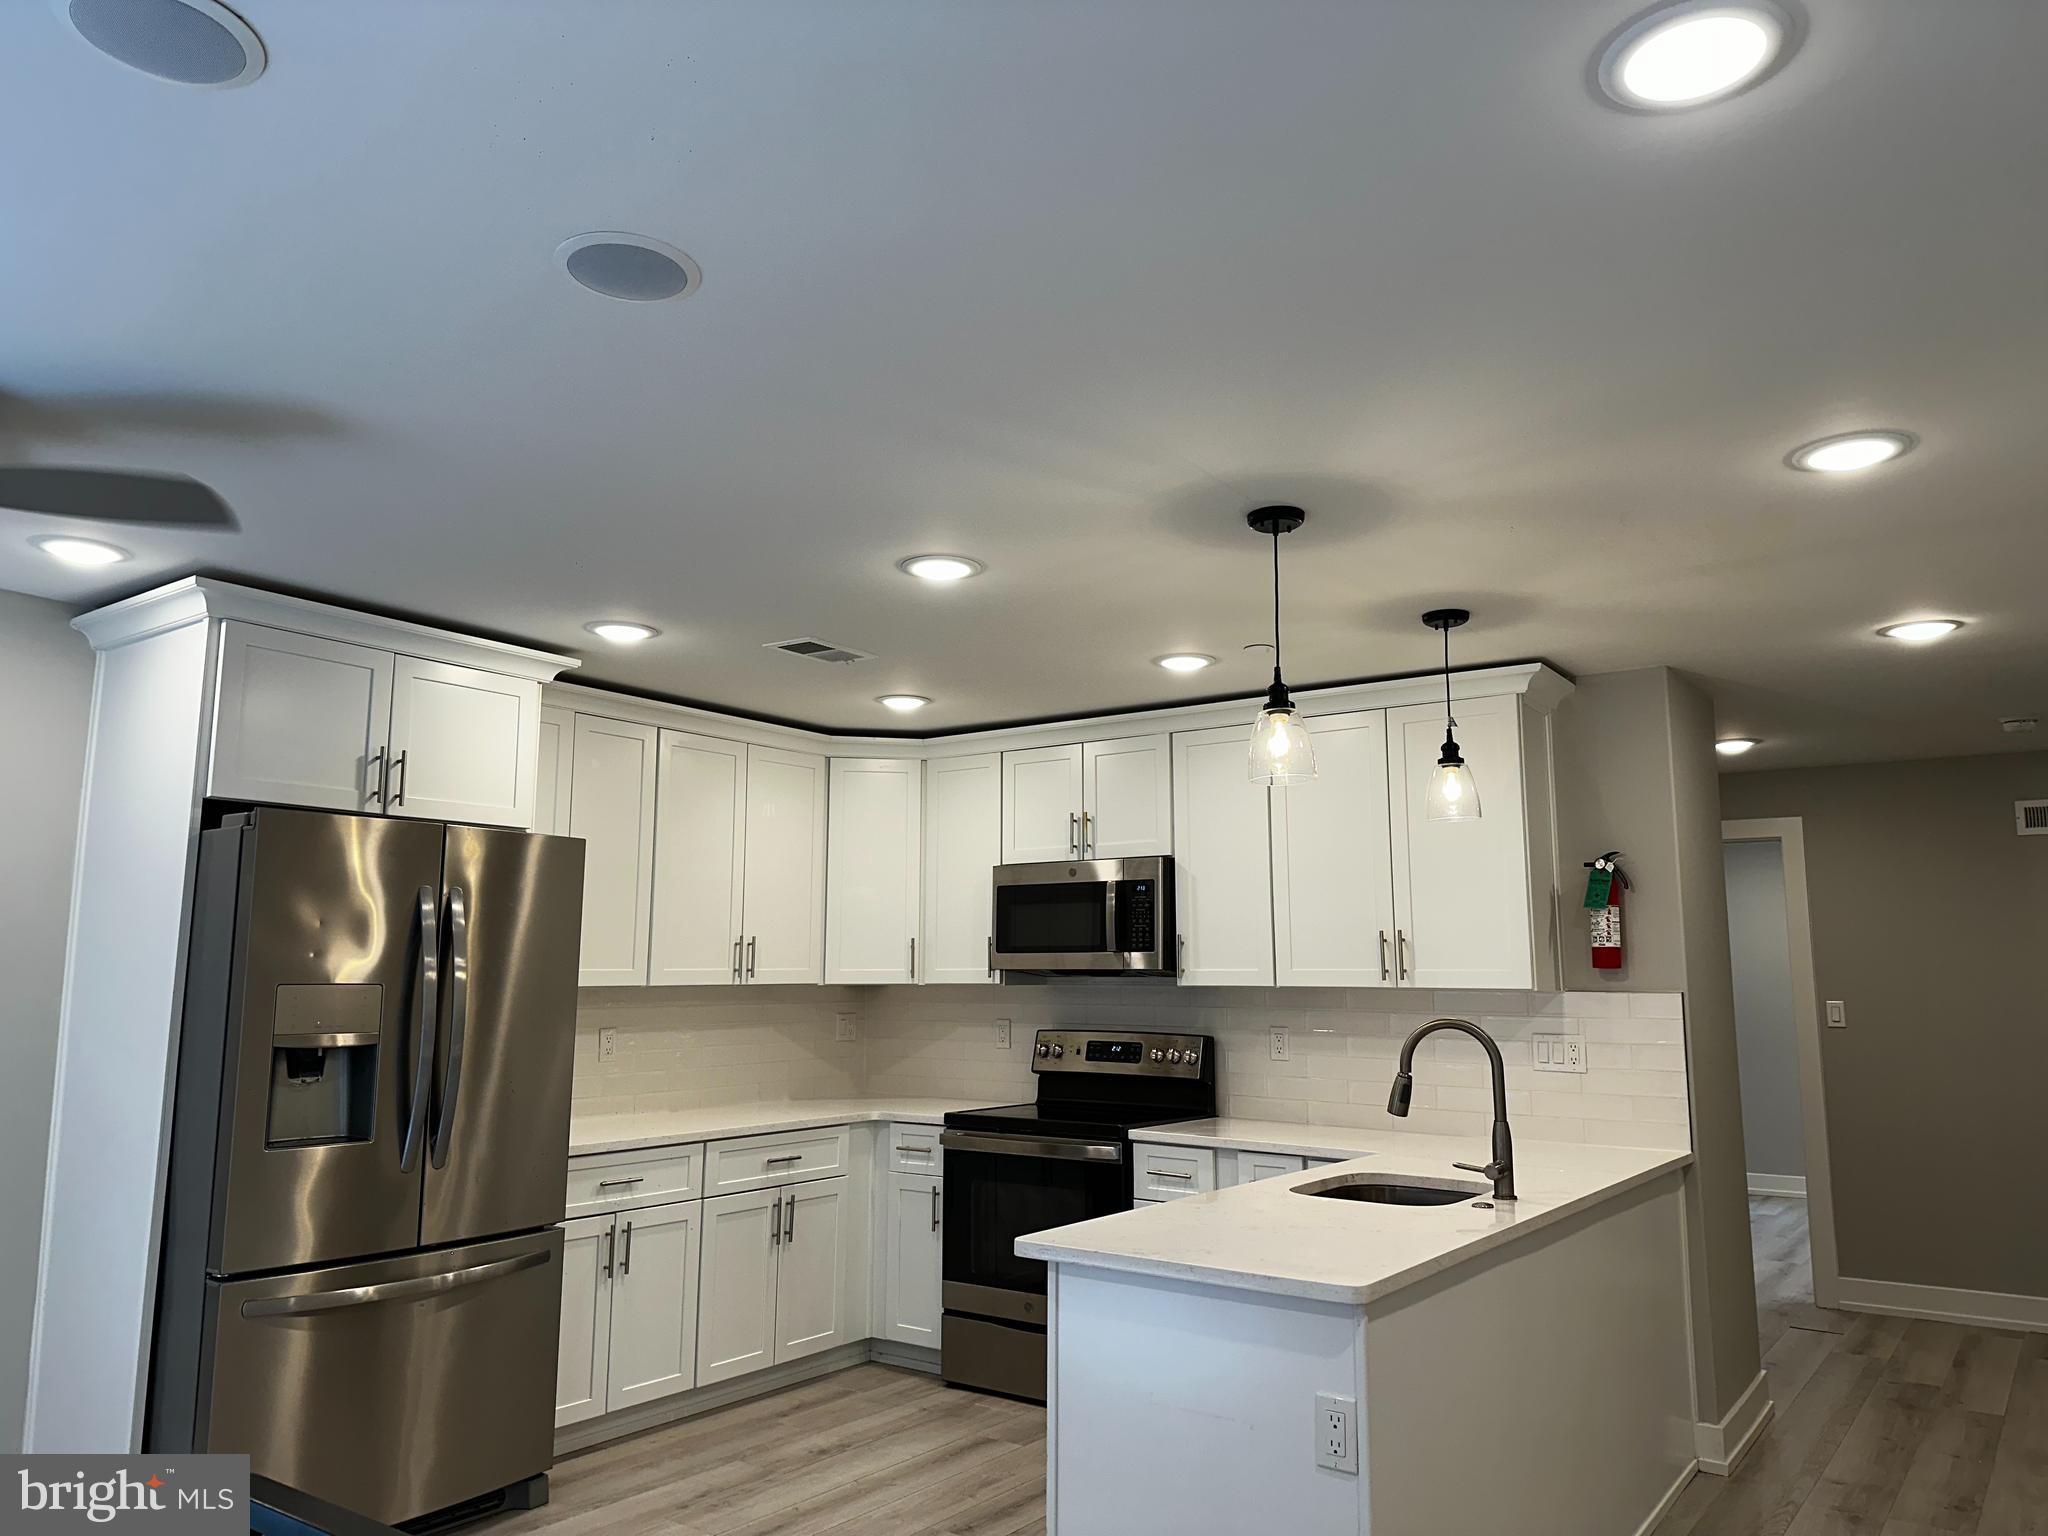 a kitchen with a sink stainless steel appliances and refrigerator